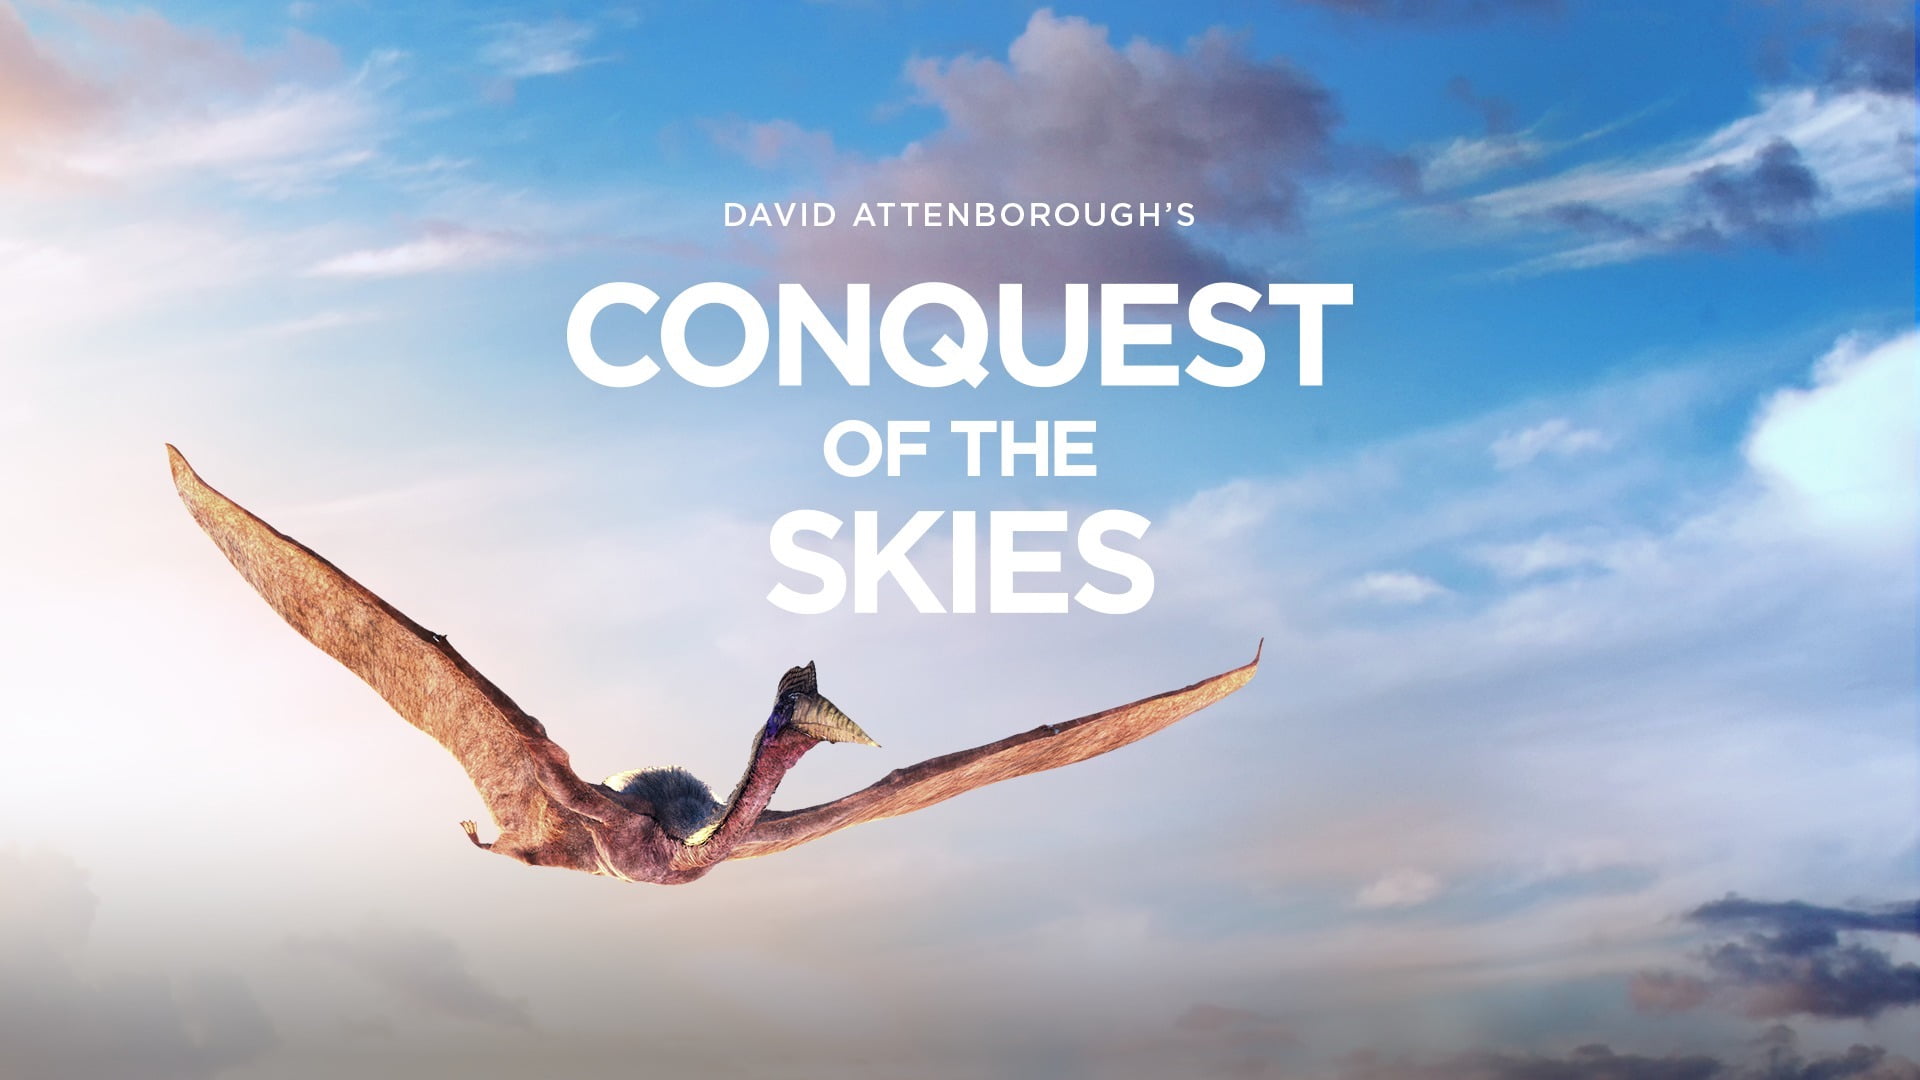 David Attenborough's latest 8K 3D VR doc for Quest 2 is stunningly beautiful